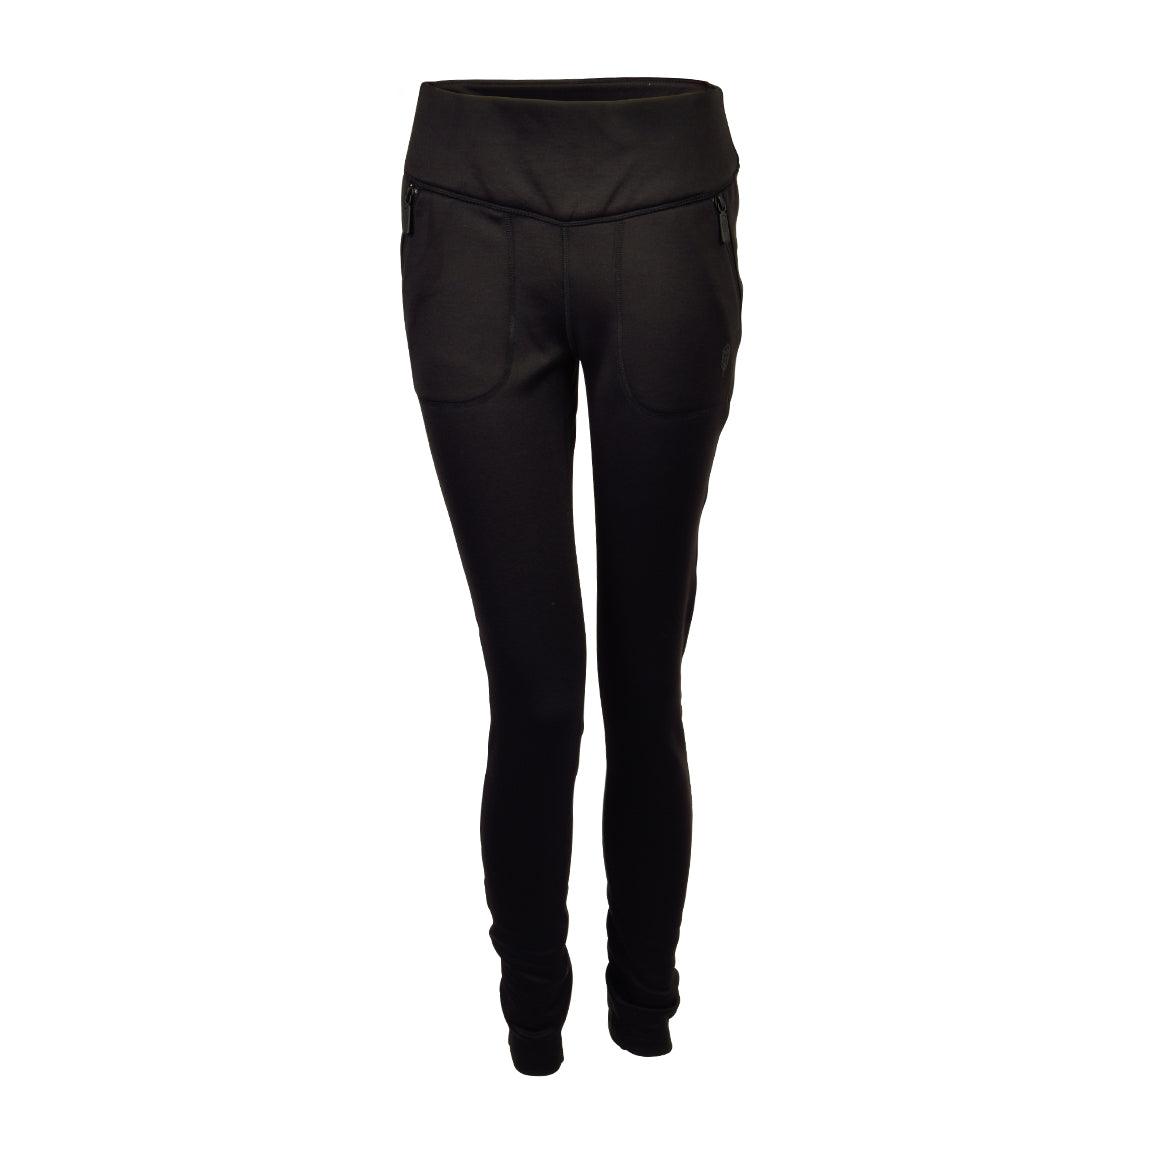 Teplo Women's Pants - Sports Excellence